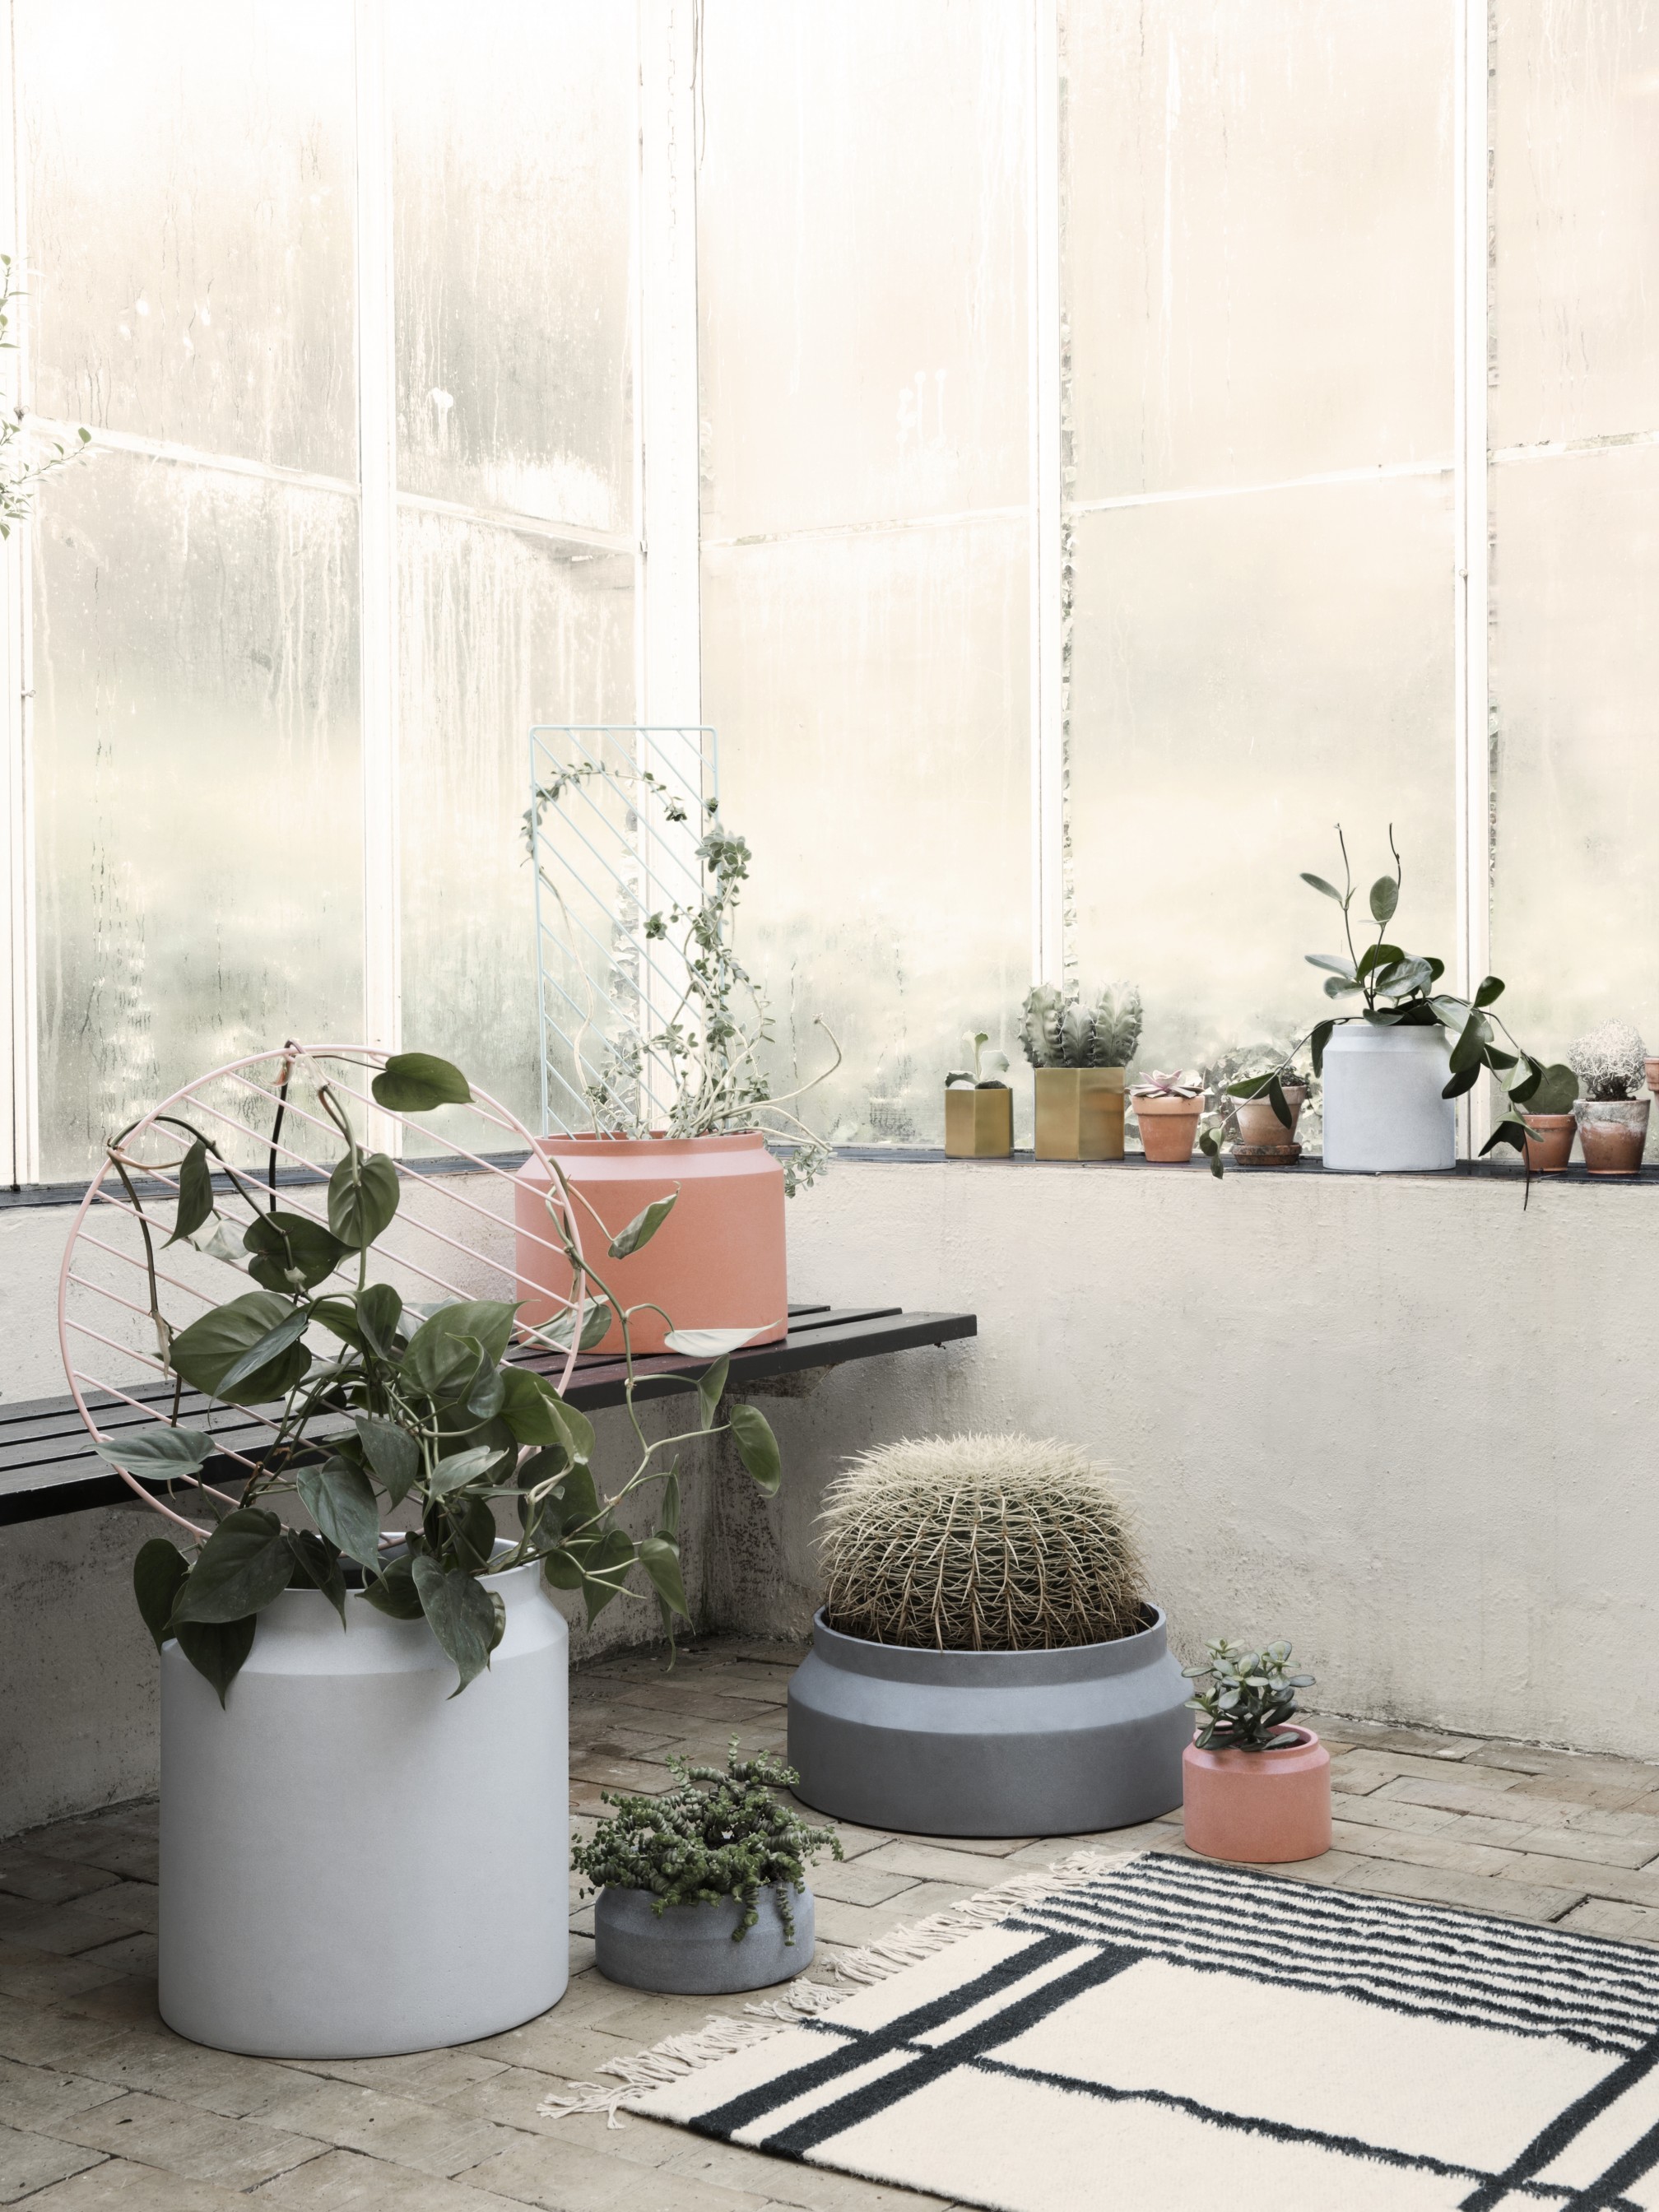 Ferm Living SS15 catalouge new pots and lots of green living from them this season.